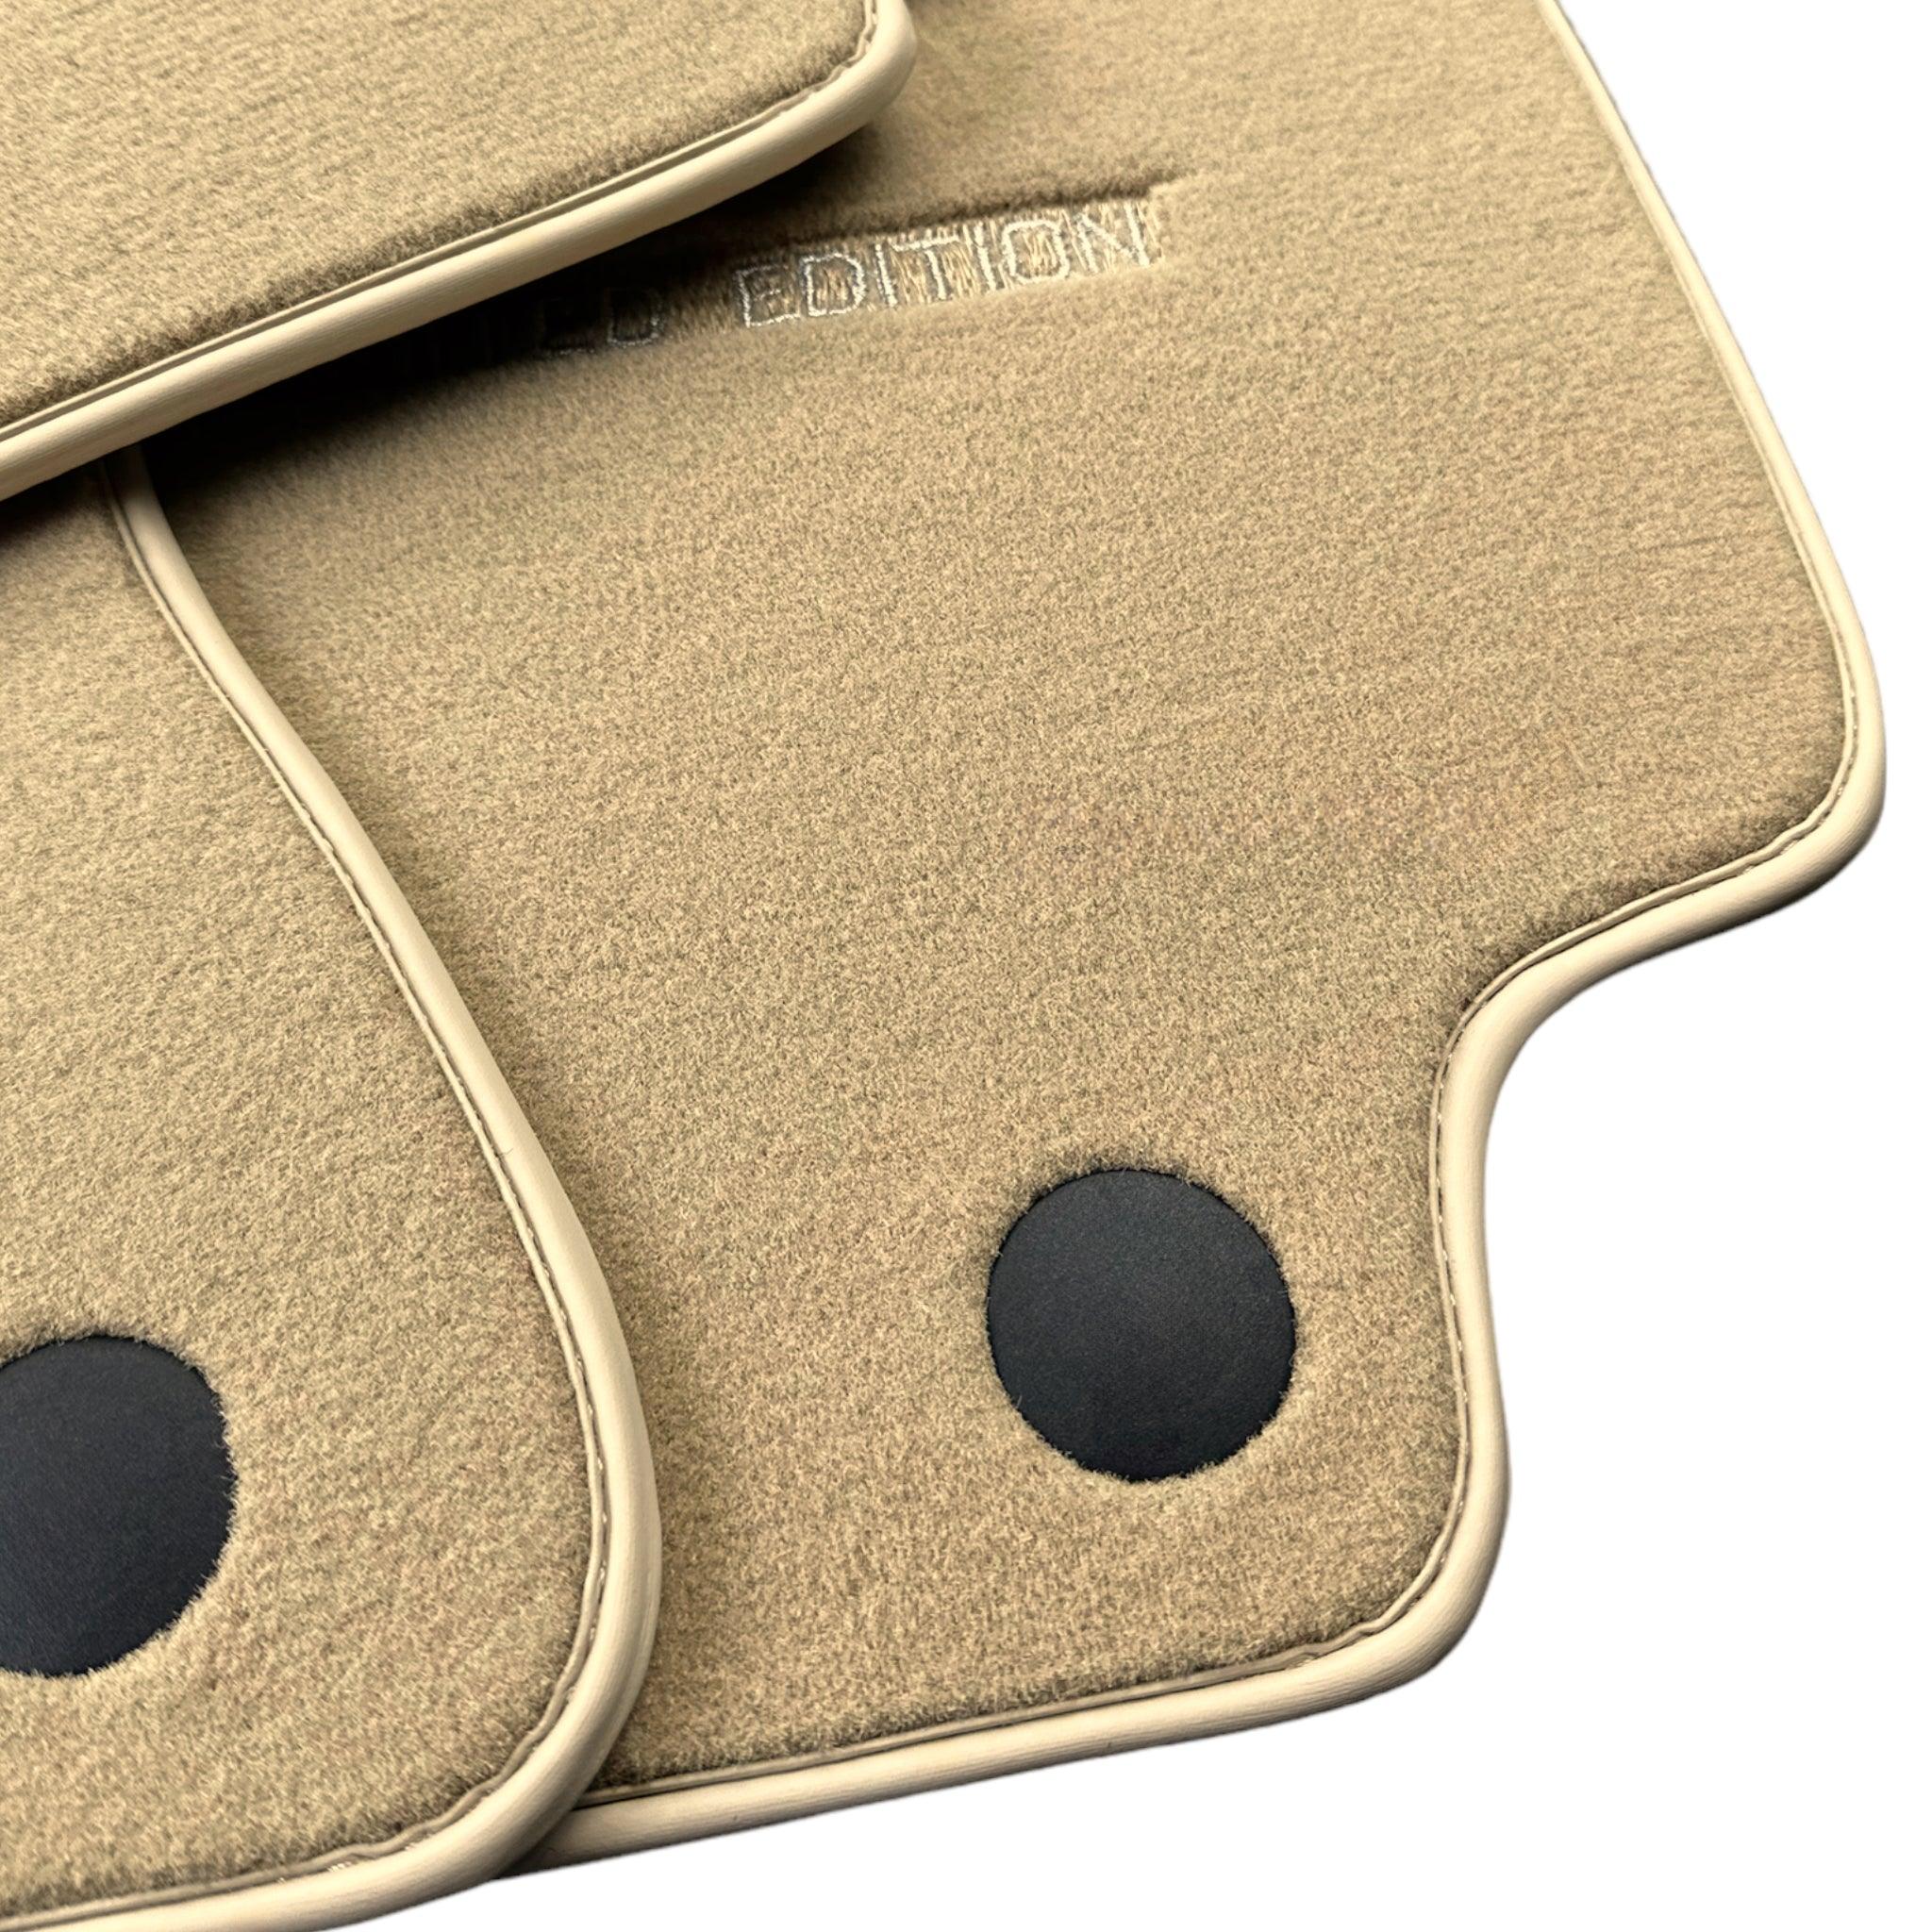 Beige Floor Mats For Mercedes Benz EQC-Class N293 (2019-2023) | Limited Edition